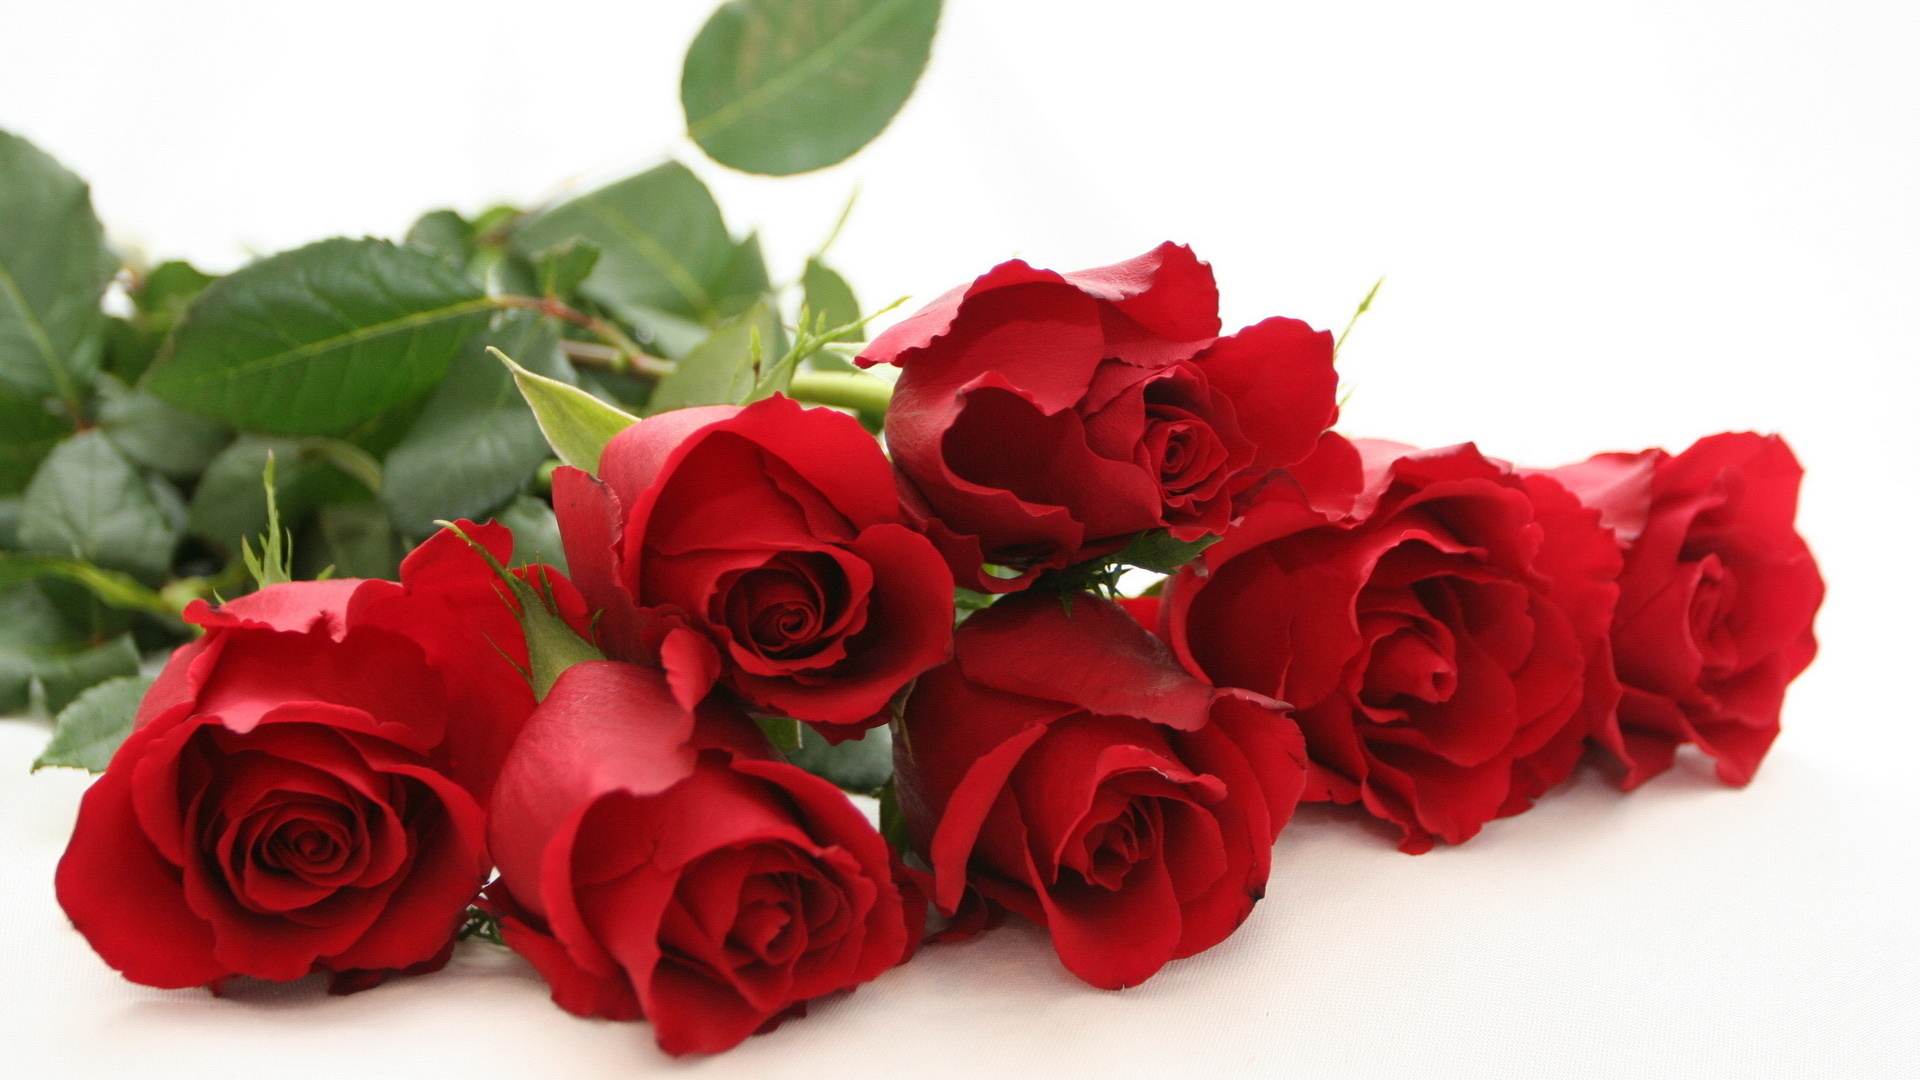 Red roses on a white table on a white background wallpapers and images